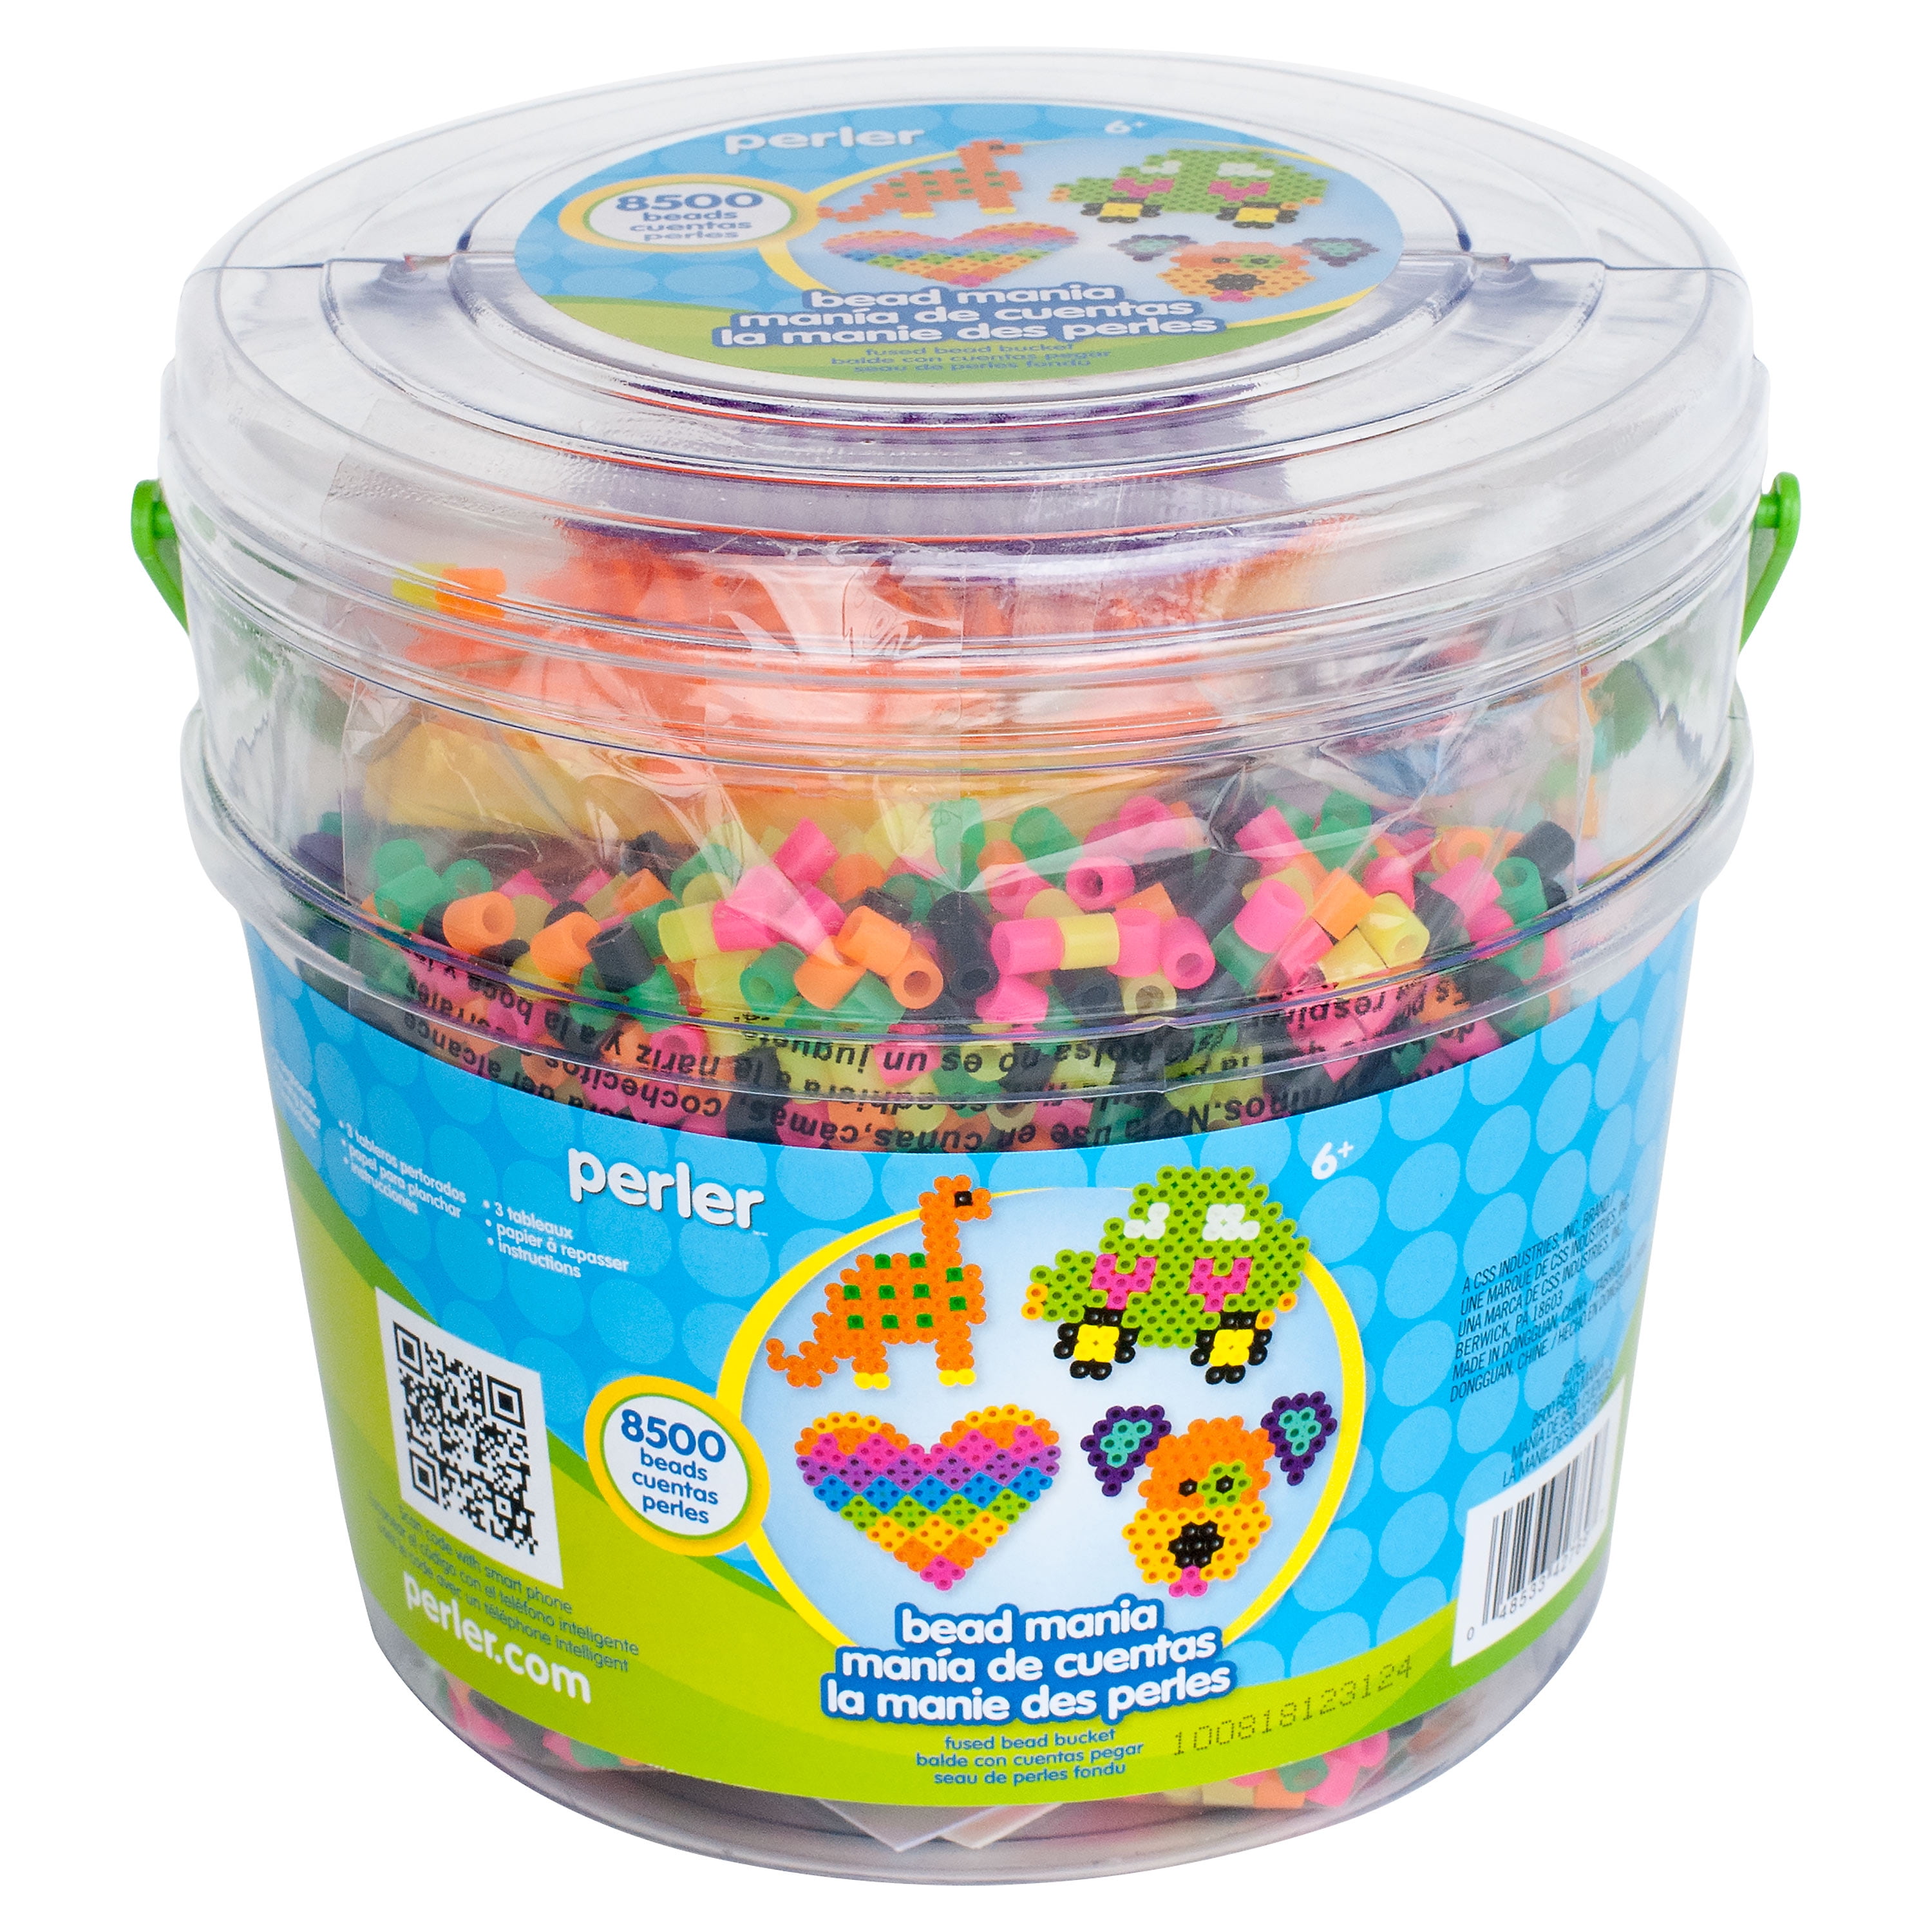 Perler Bead Mania Fused Bead Activity Bucket, Ages 6 and up, 8505 Pieces